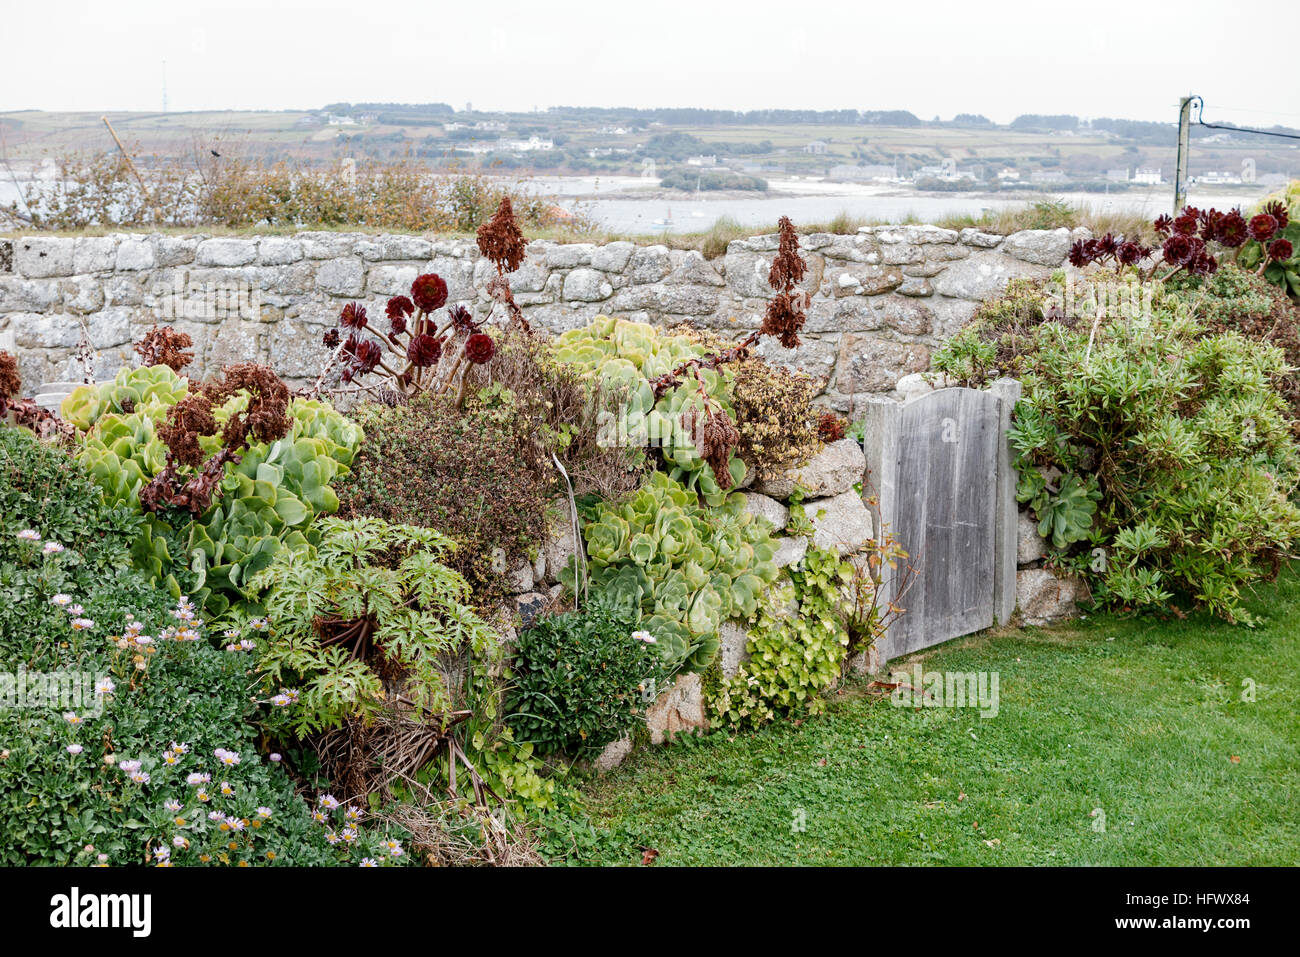 Aeonium plants growing in stone wall in the temperate climate of St Marys, Isles of Scilly Stock Photo